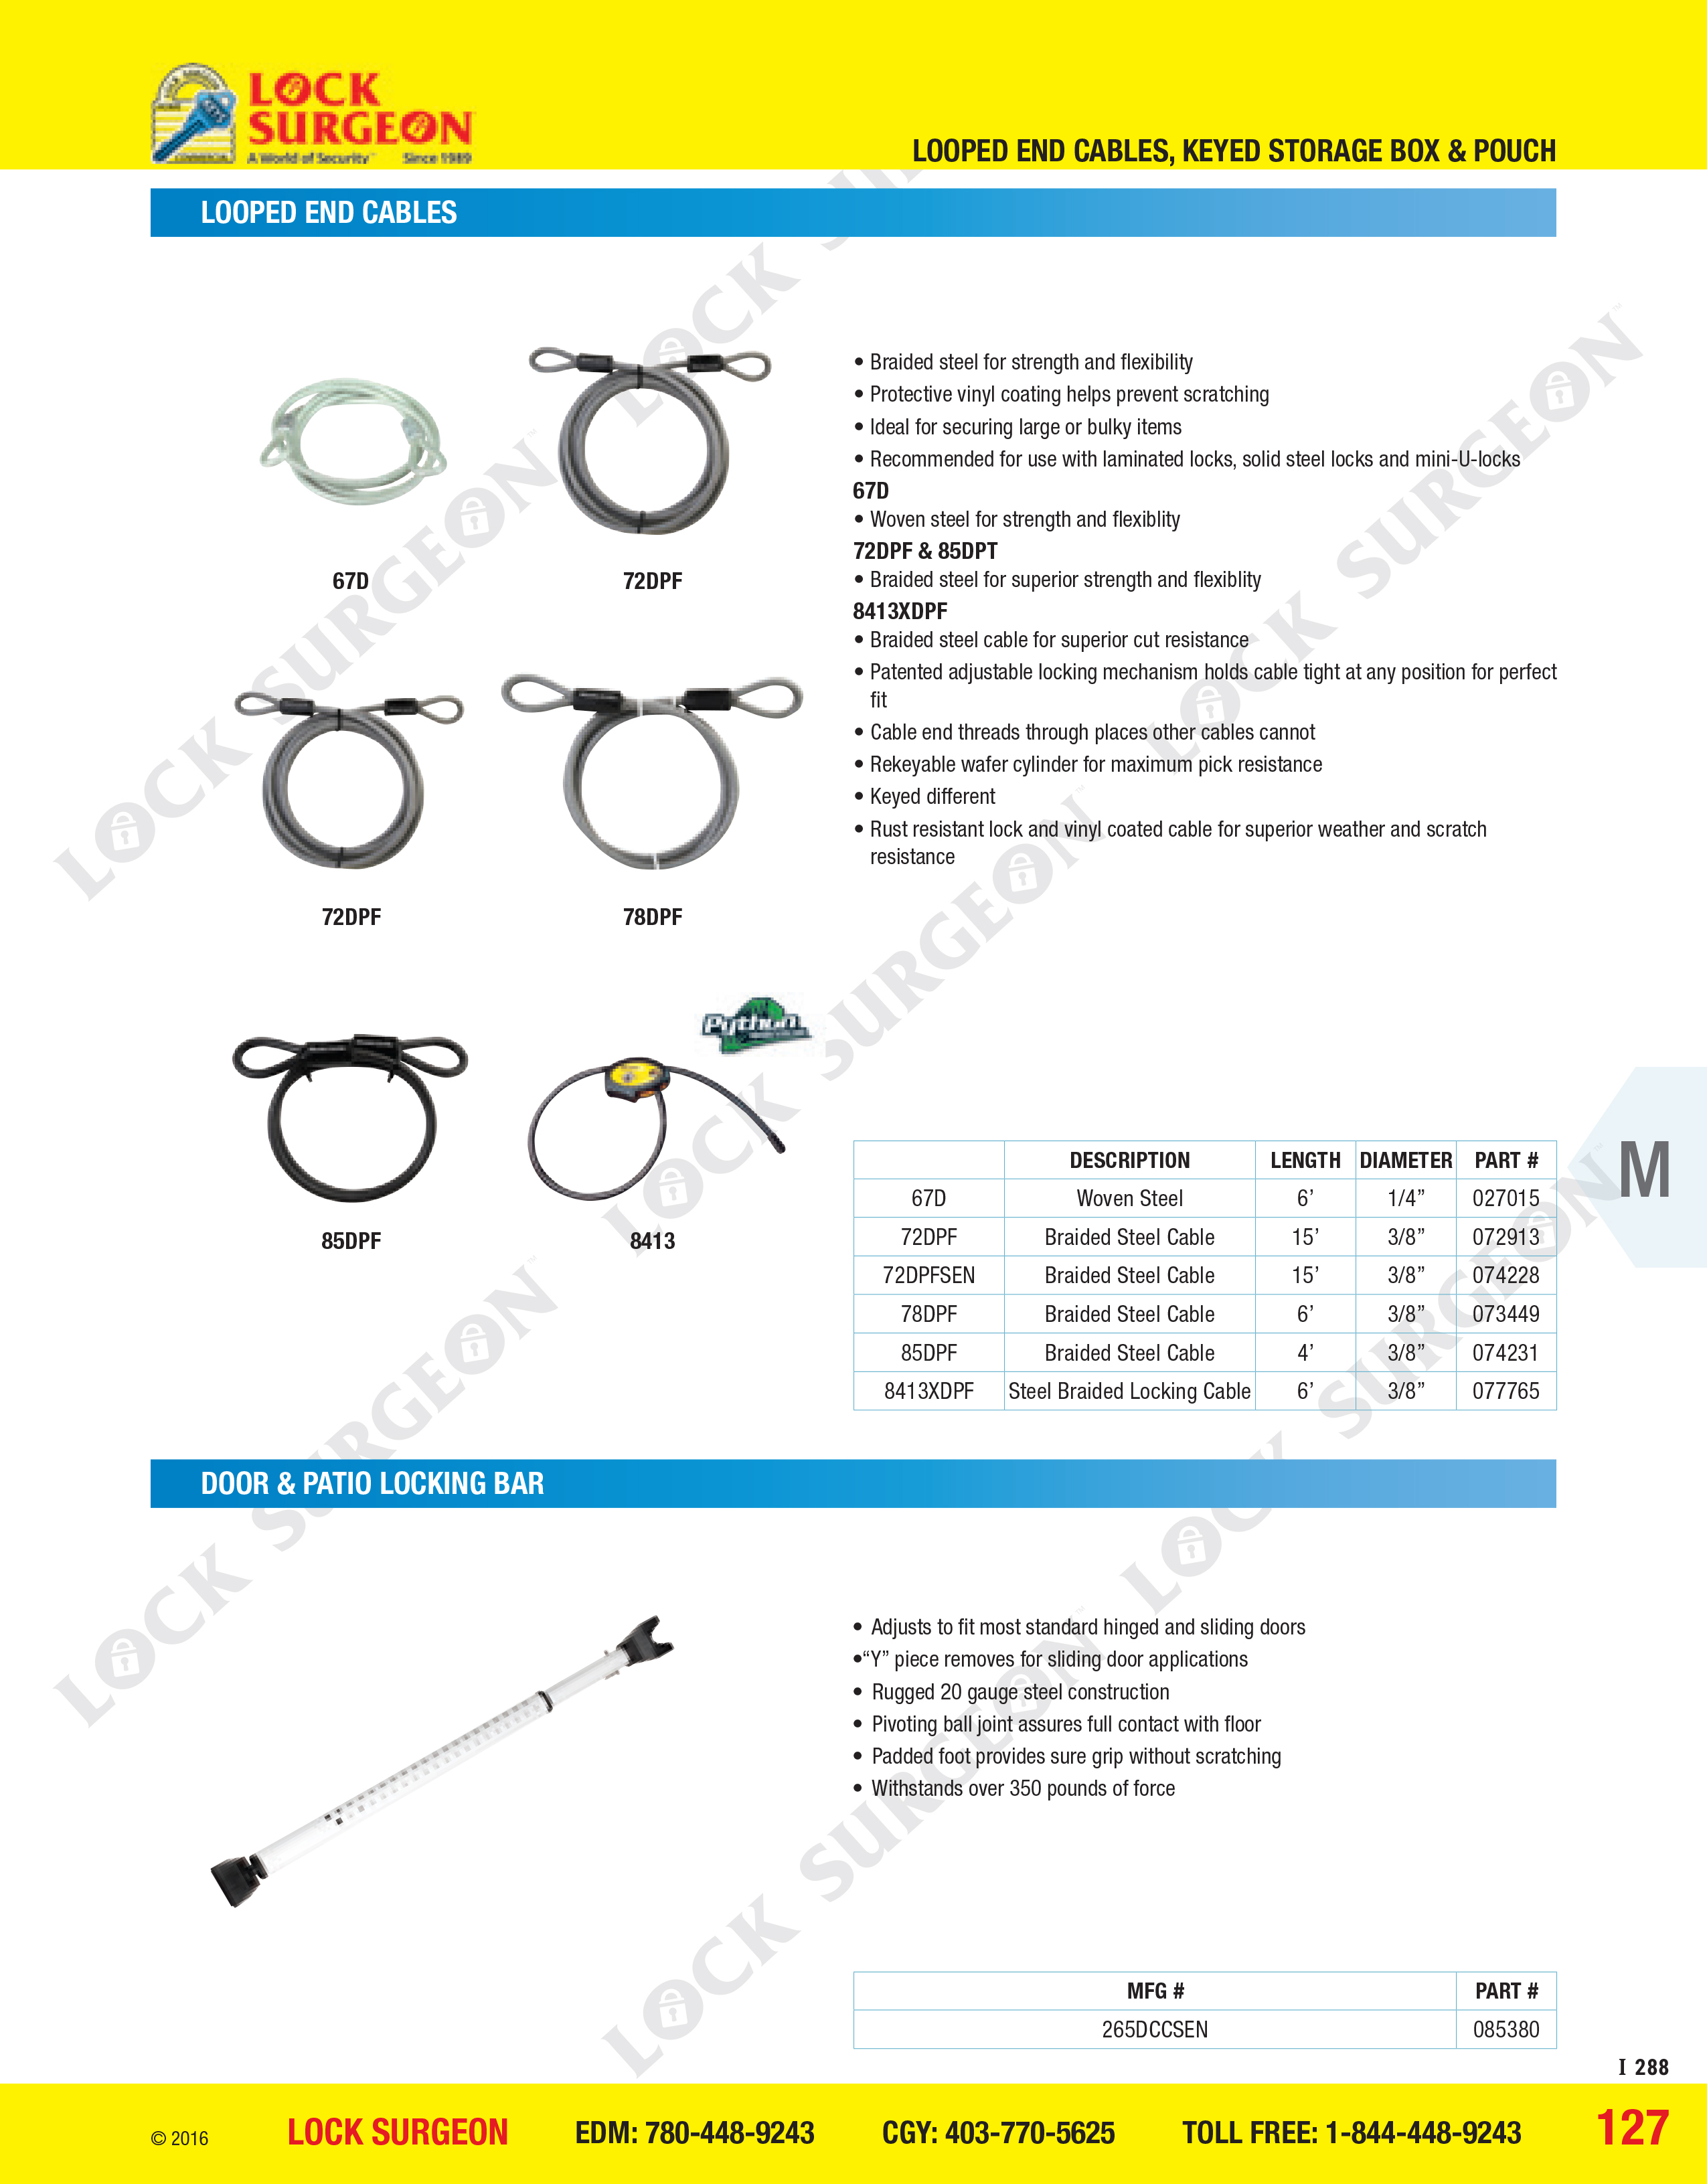 Looped end cables, Door and patio locking bar